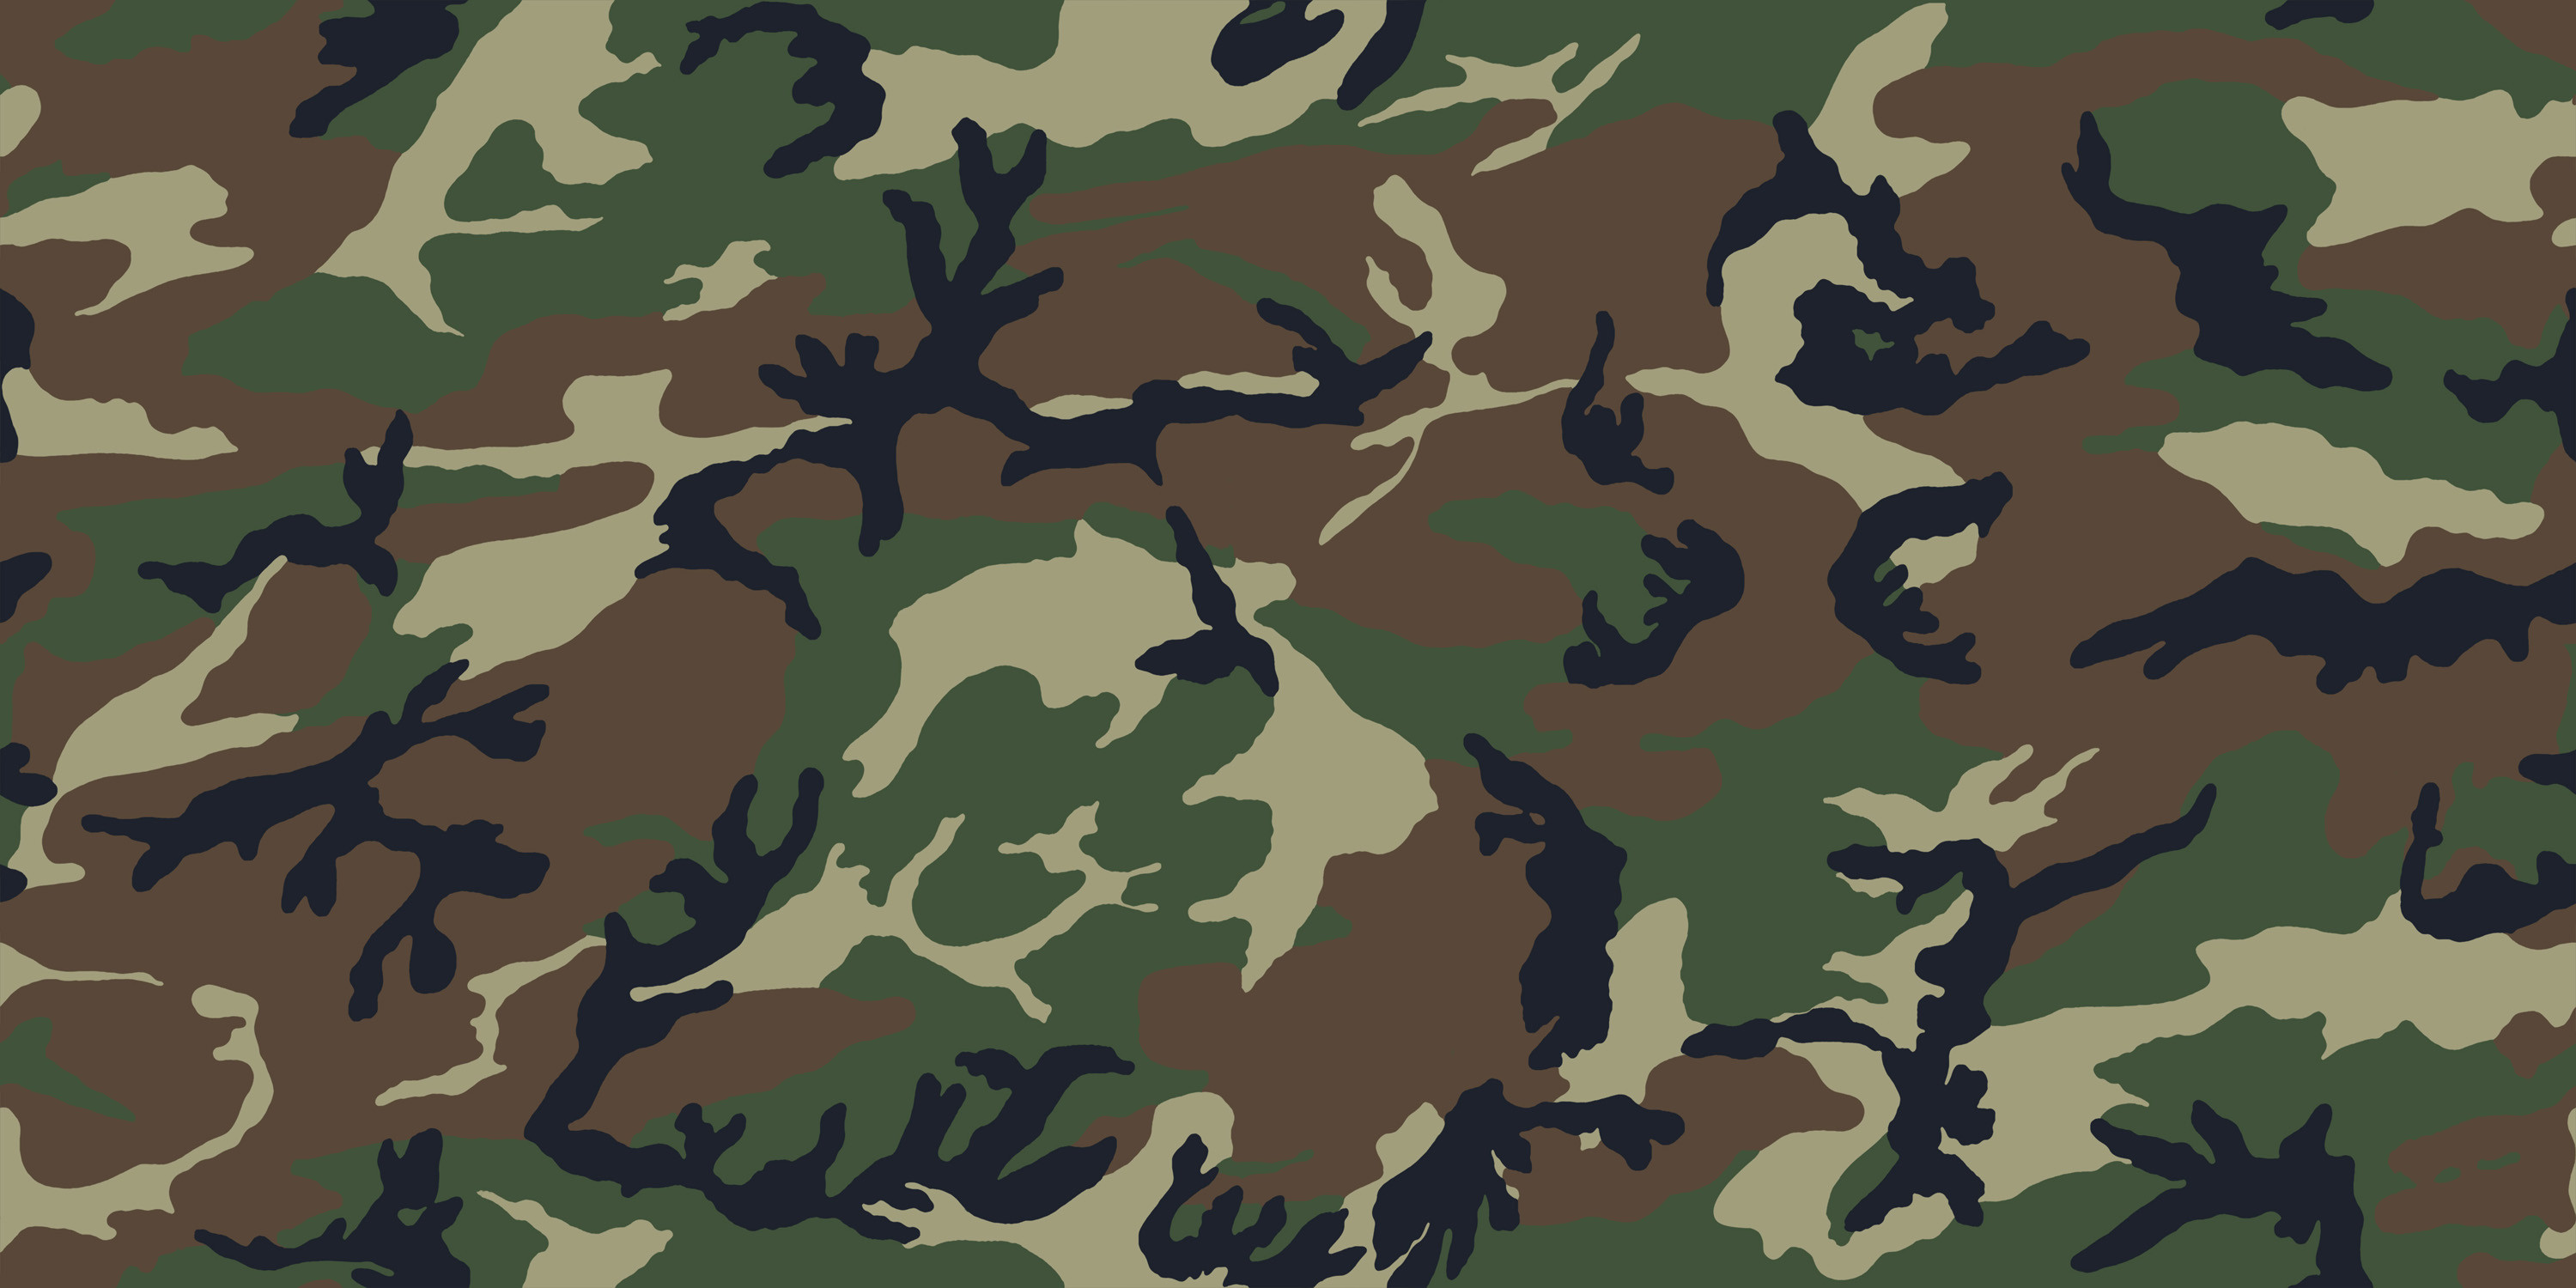 3000x1500 Res: 1920x1080, Awesome HD Camouflage Wallpapers.